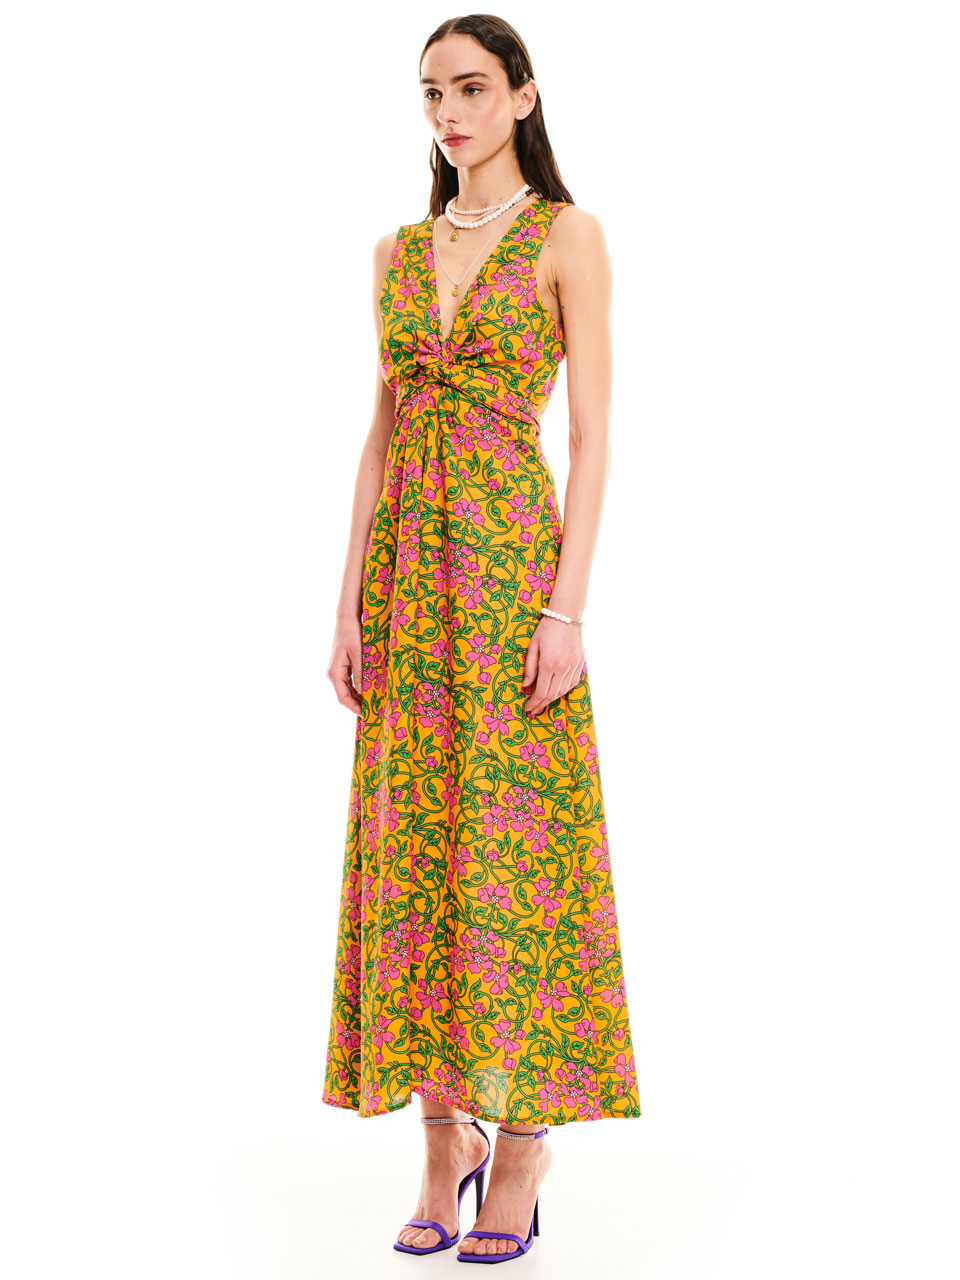 We are Front Bow Maxi Dress Floral Orange